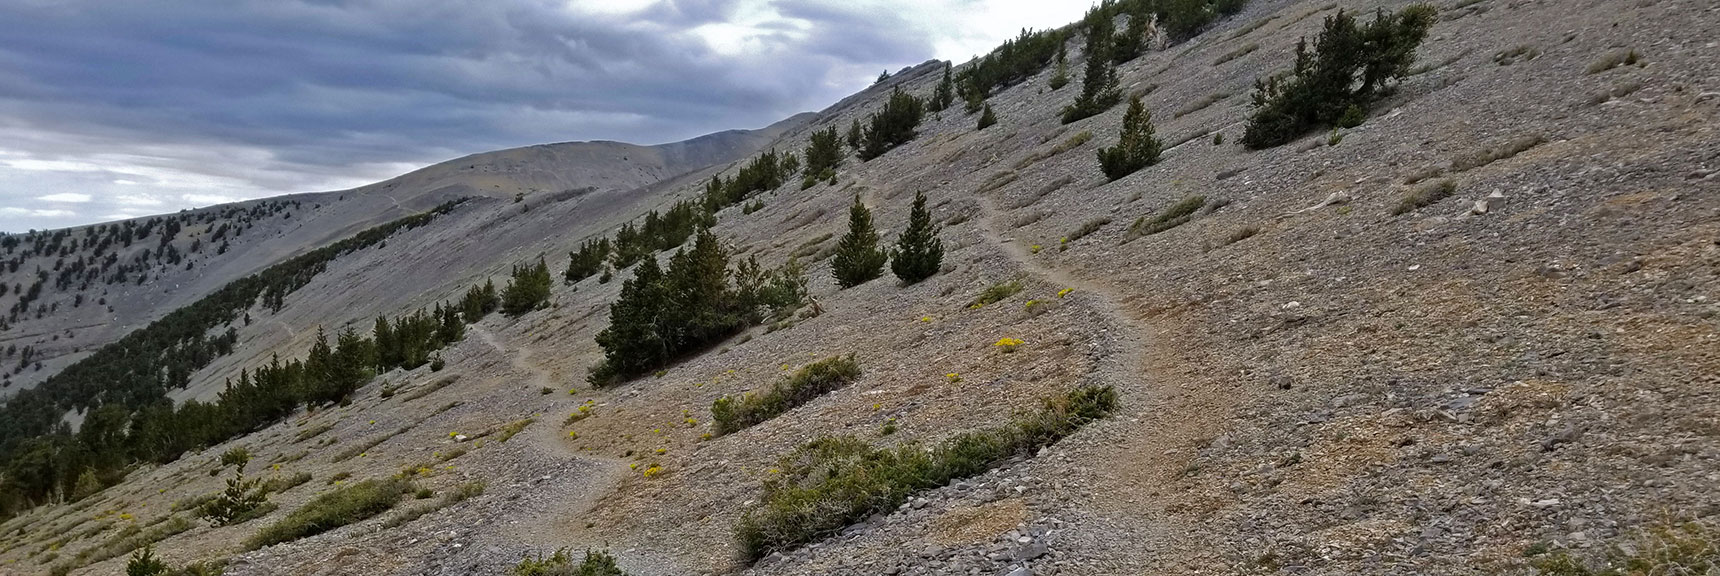 Looking Back from Point Where the 2 Trails Diverge Just Below the Saddle | Lee and Charleston Peaks via Lee Canyon Mid Ridge | Mt Charleston Wilderness | Spring Mountains, Nevada